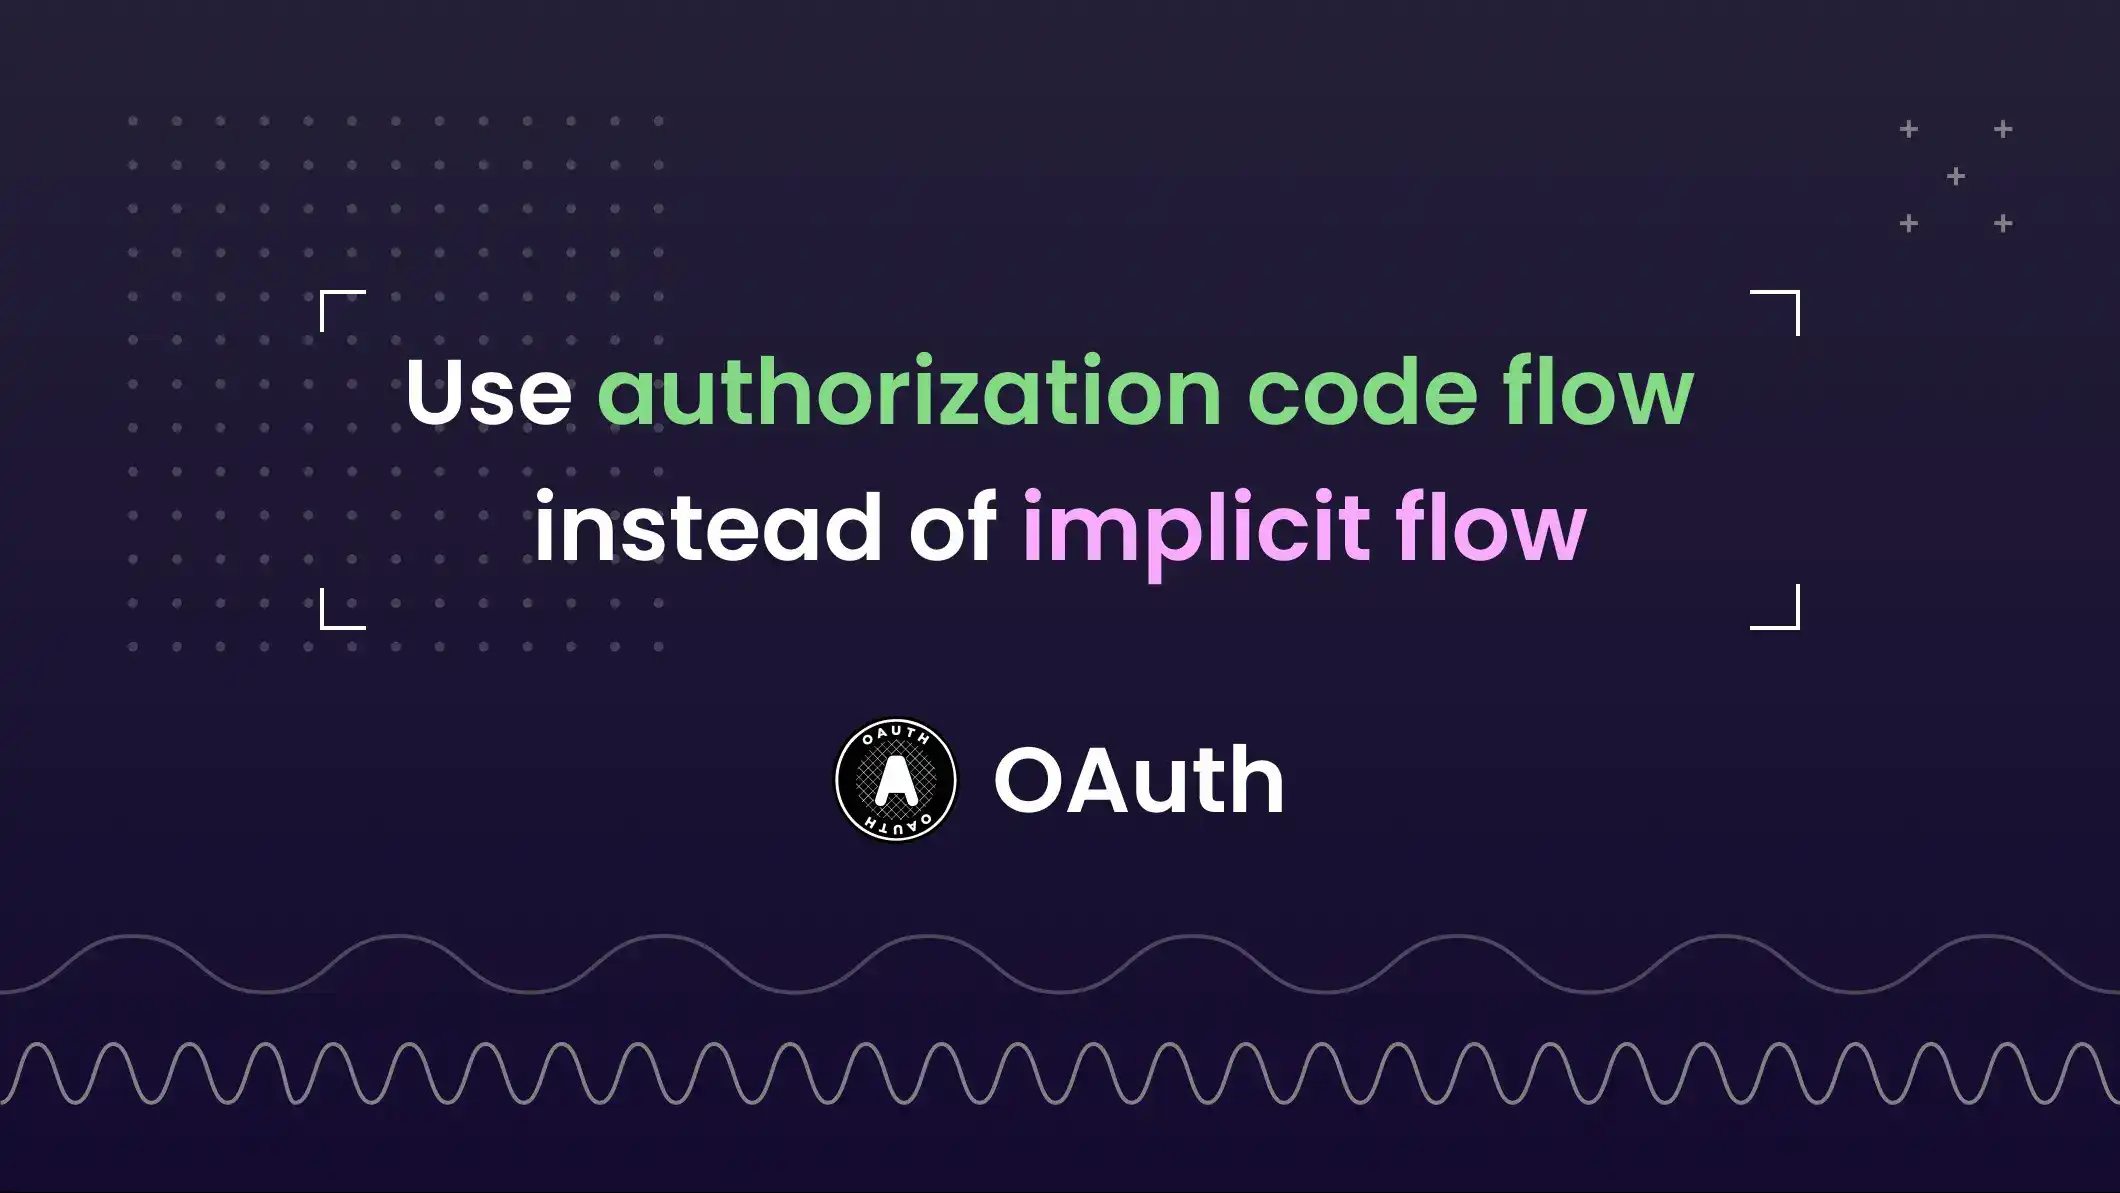 Why you should use authorization code flow instead of implicit flow?